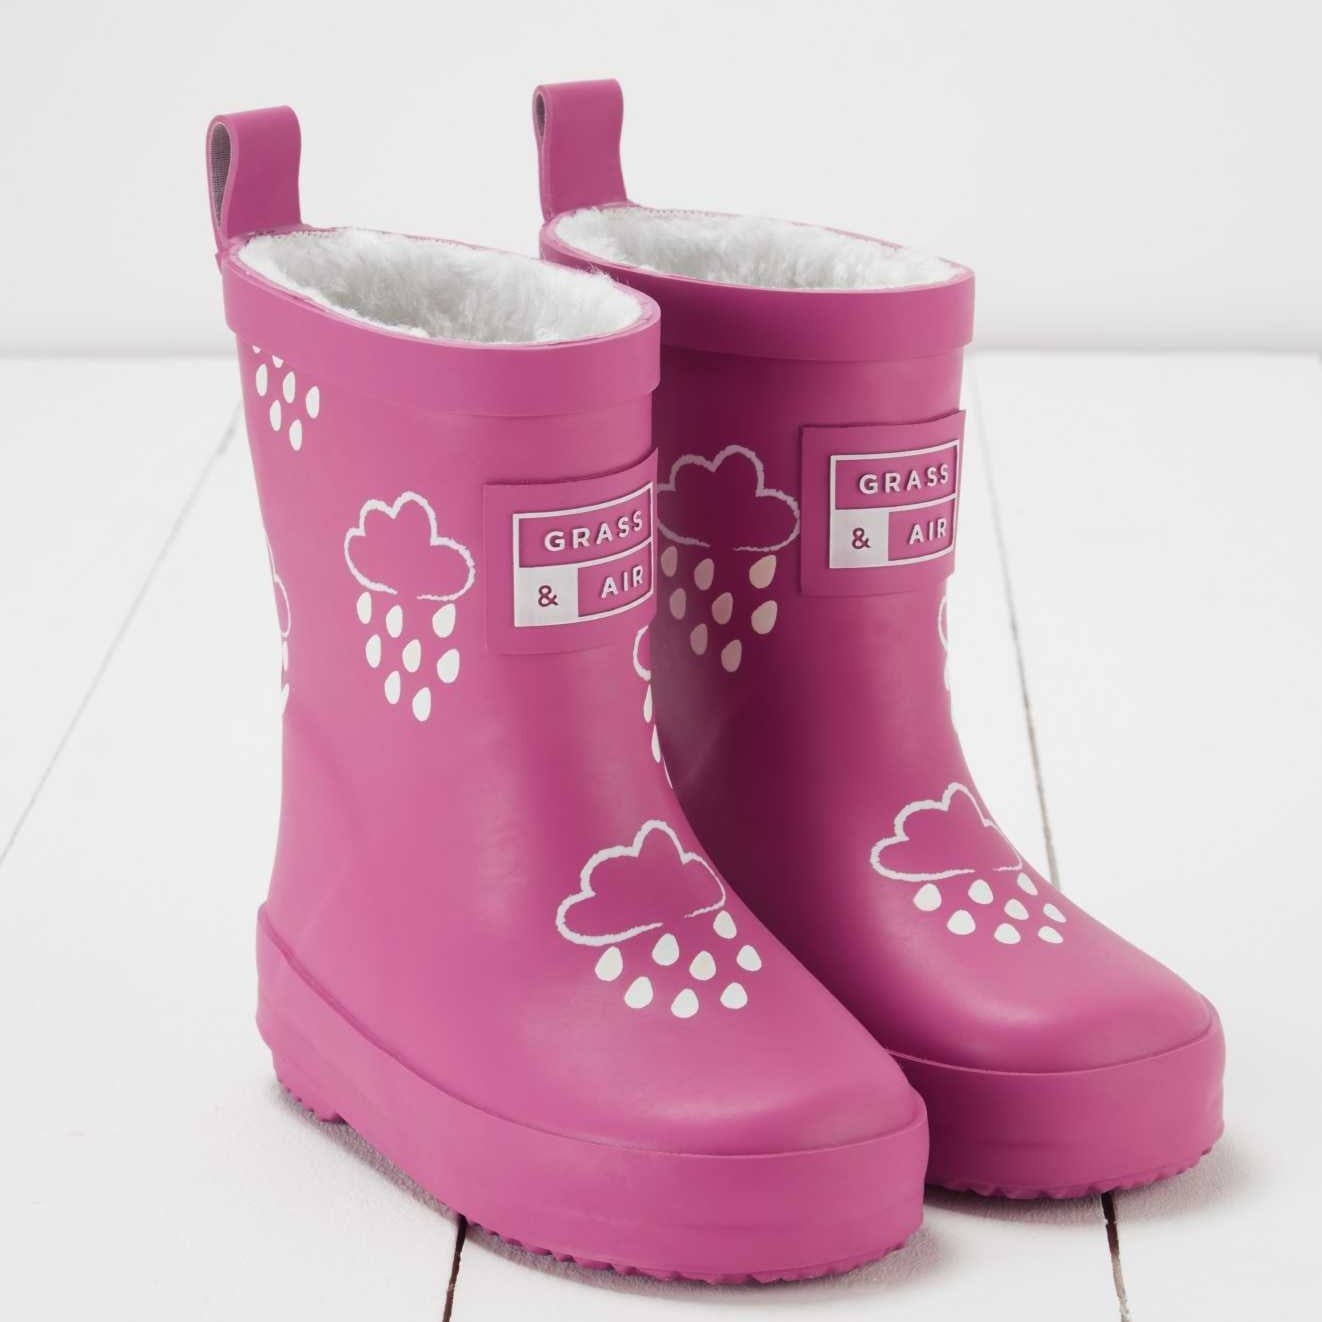 Grass & Air Wellie Boots Kids Colour Changing Wellies (Orchid Pink)